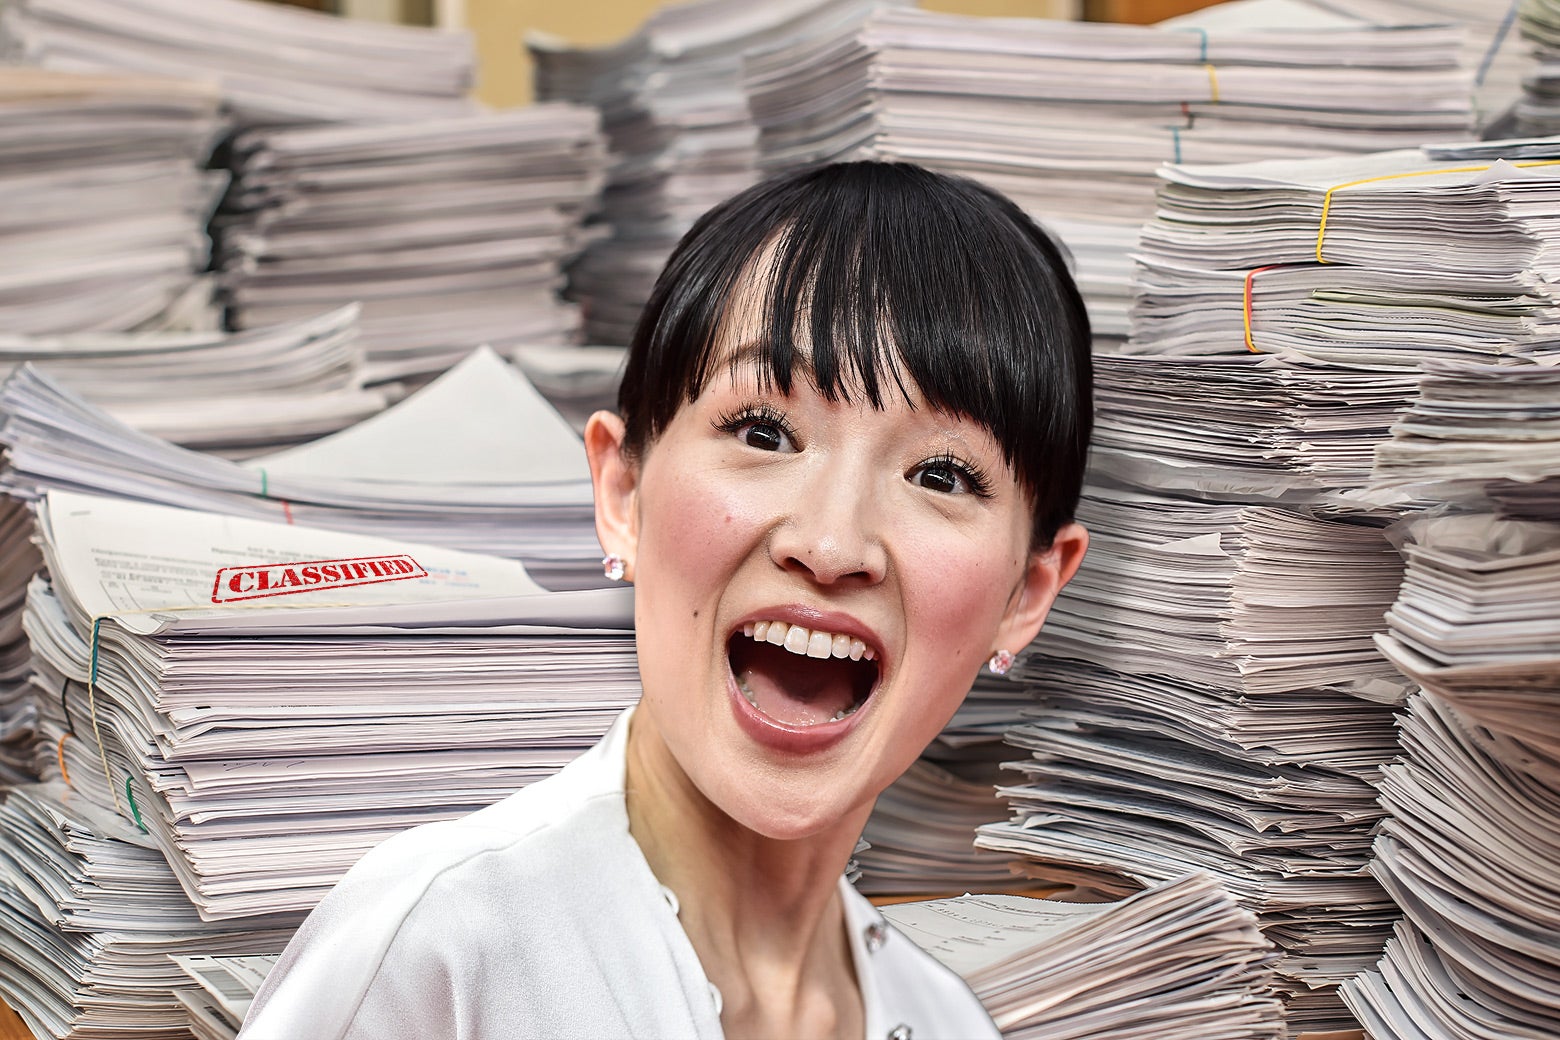 A smiling Marie Kondo in front of many stacks of classified files.